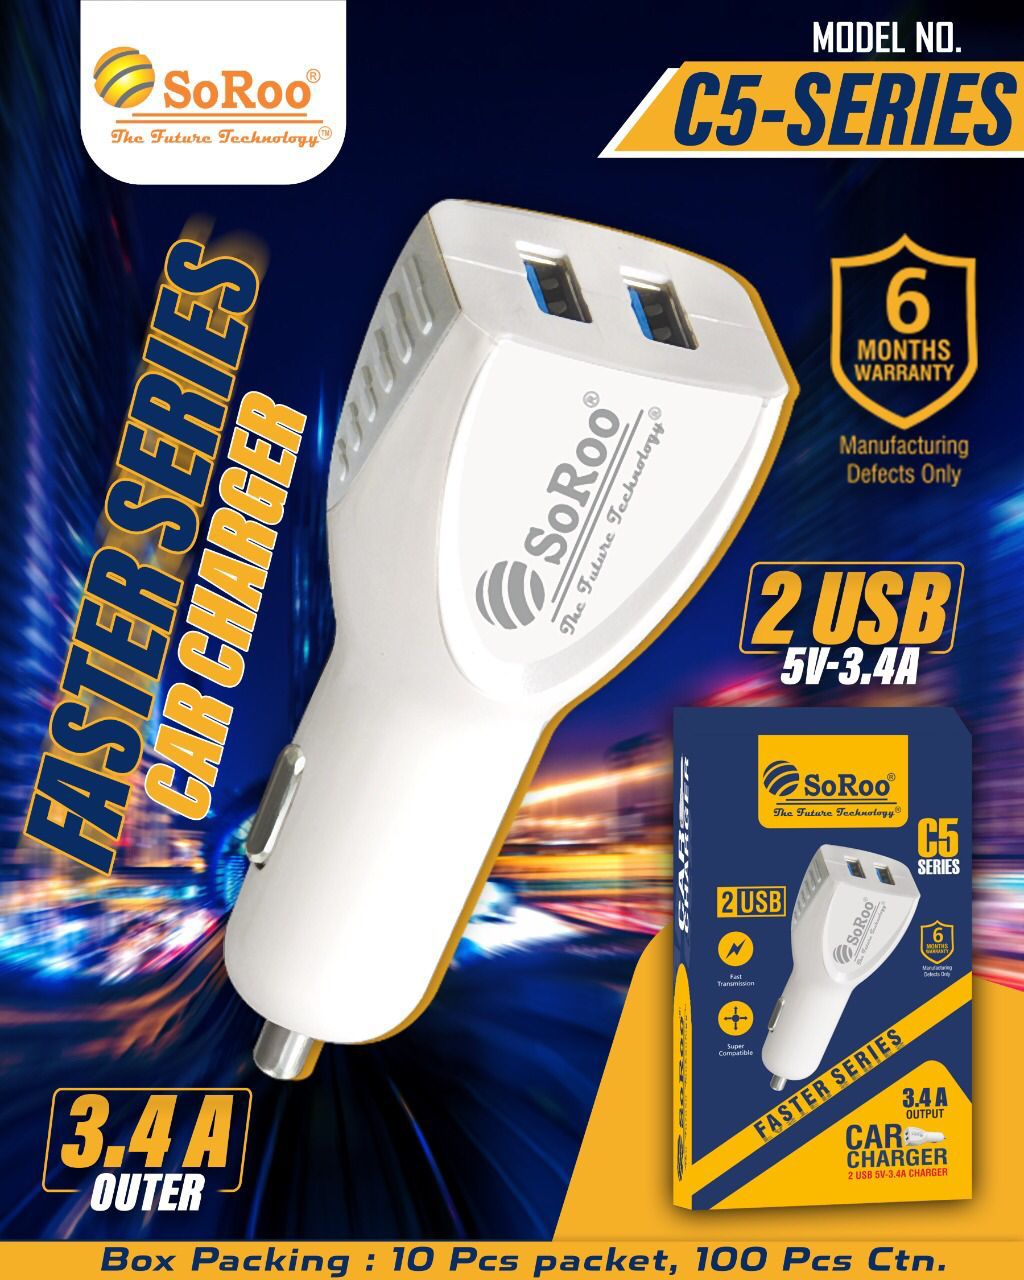 Soroo Car Mobile Charger C-5